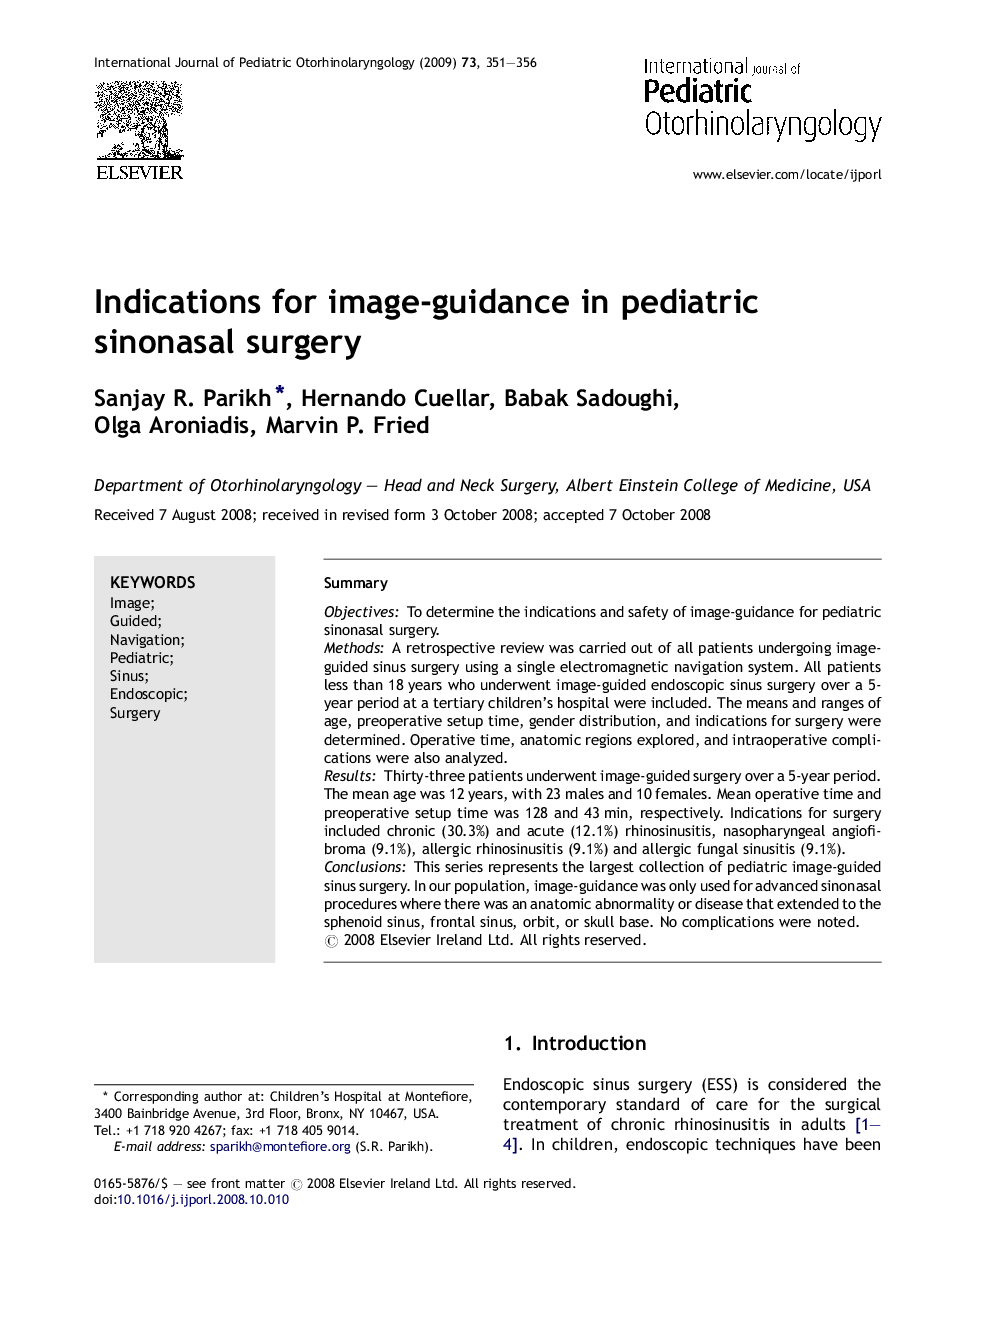 Indications for image-guidance in pediatric sinonasal surgery